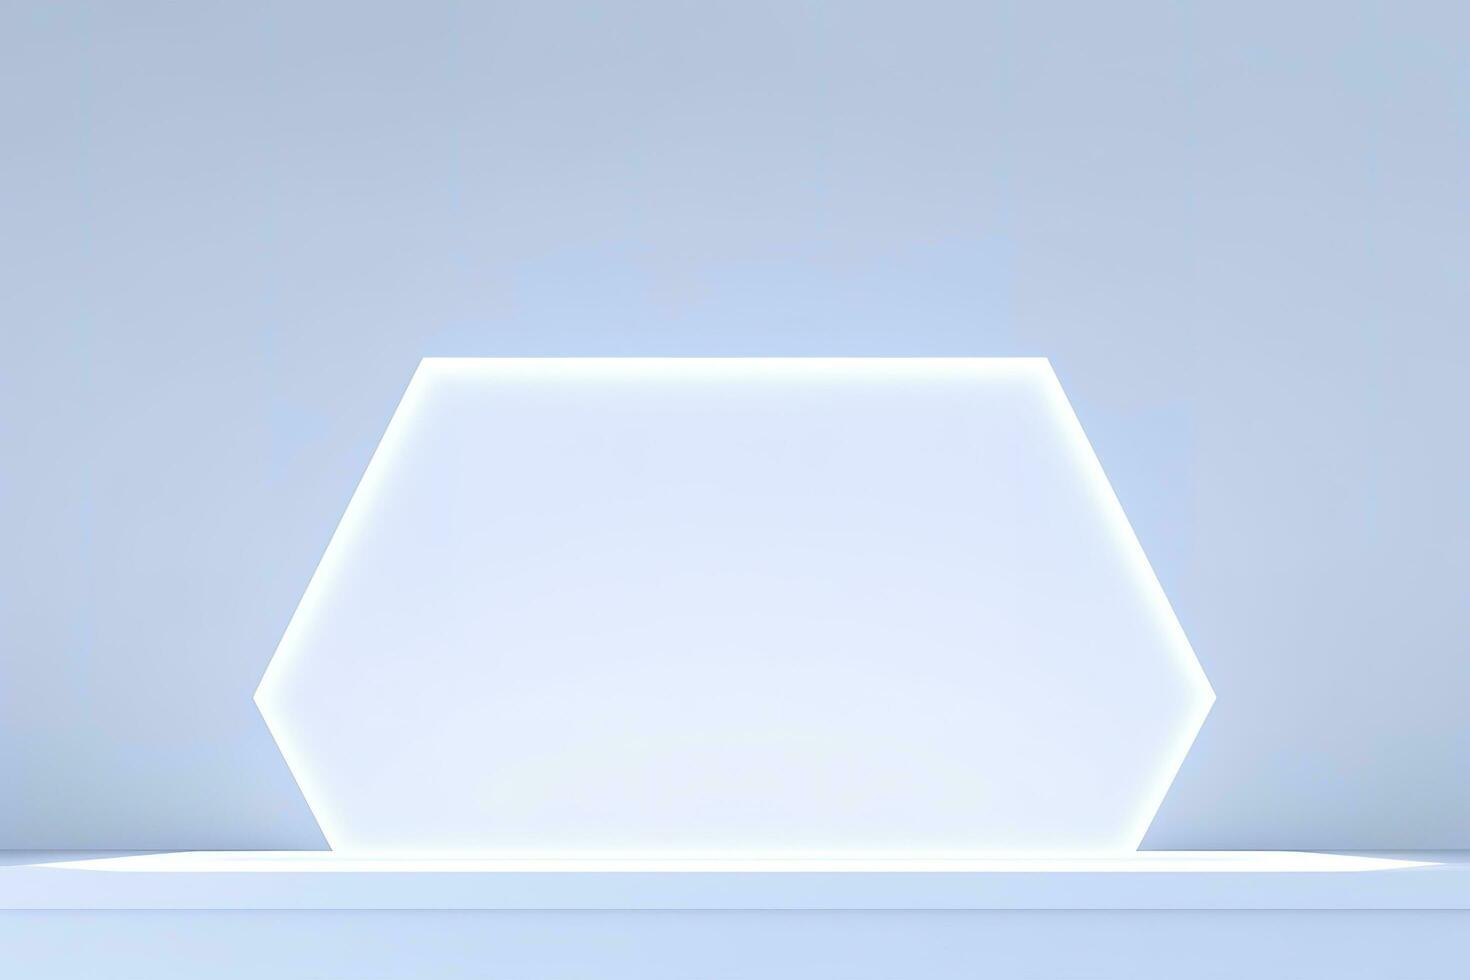 Realistic podium display with neon white lights, Product display background with light frame, White prodium product display with light effect, neon lights background, generate ai photo